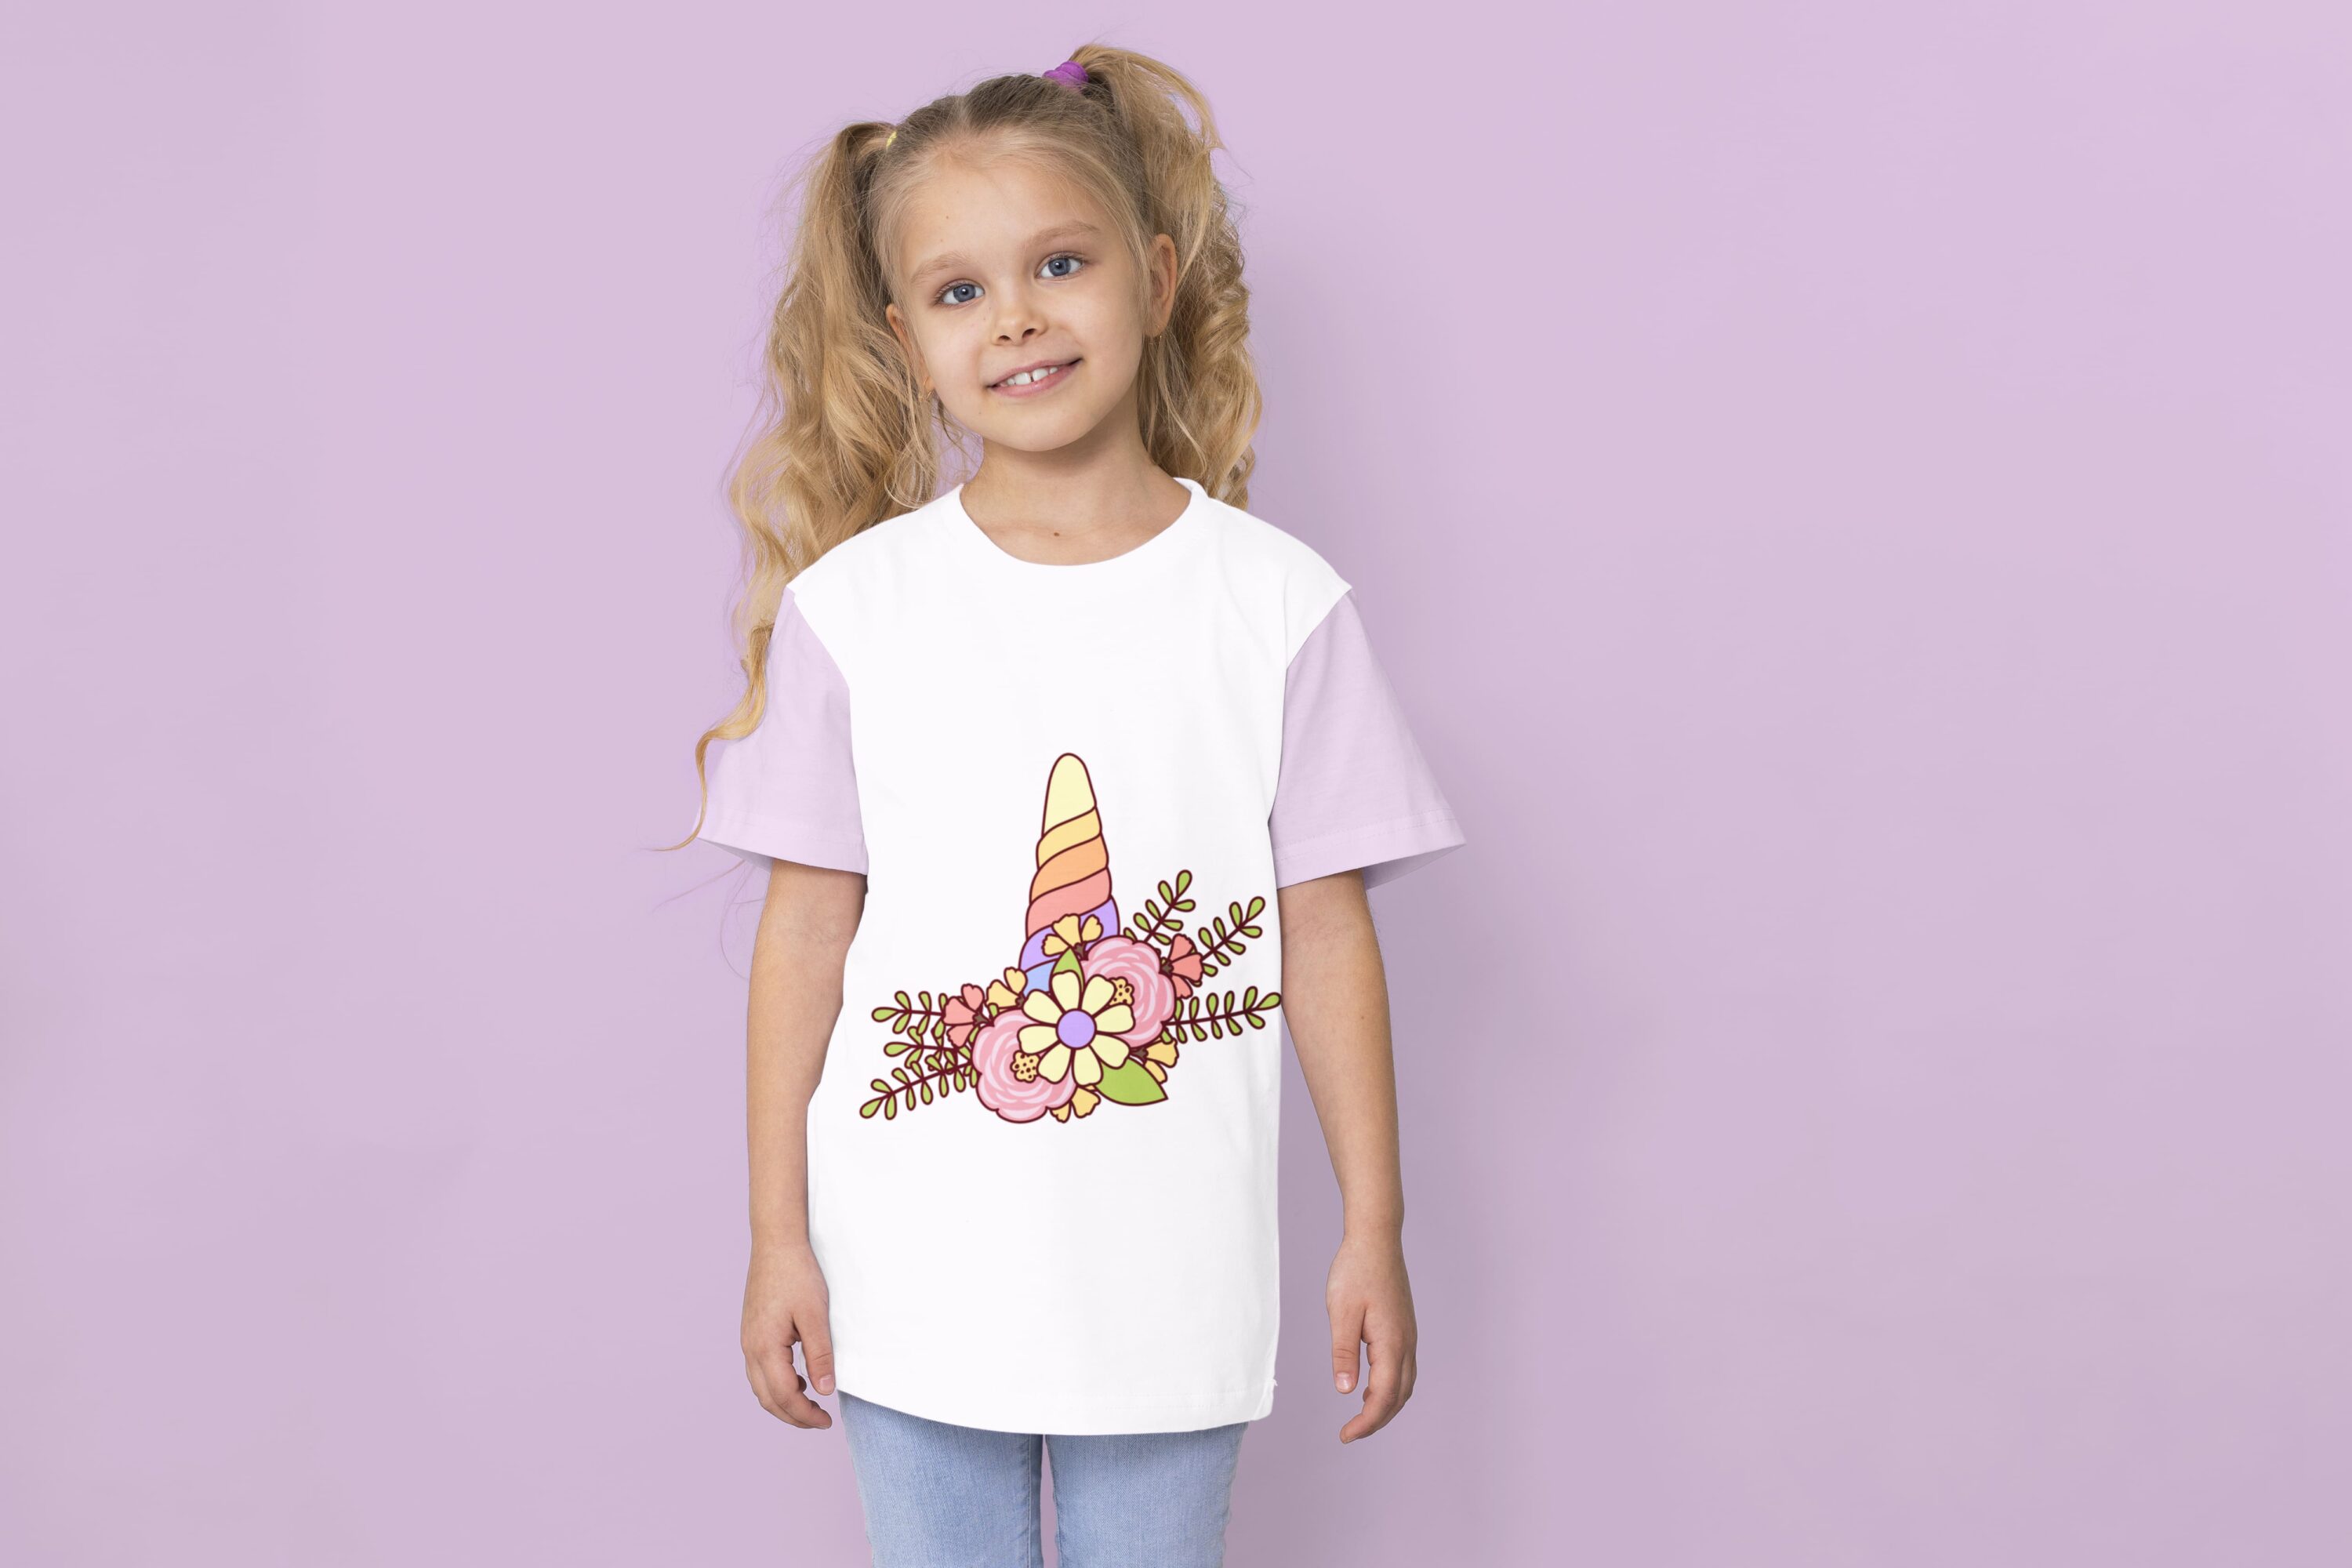 A white t-shirt with lavender sleeves and a colorful unicorn horn on a girl against a lavender background.